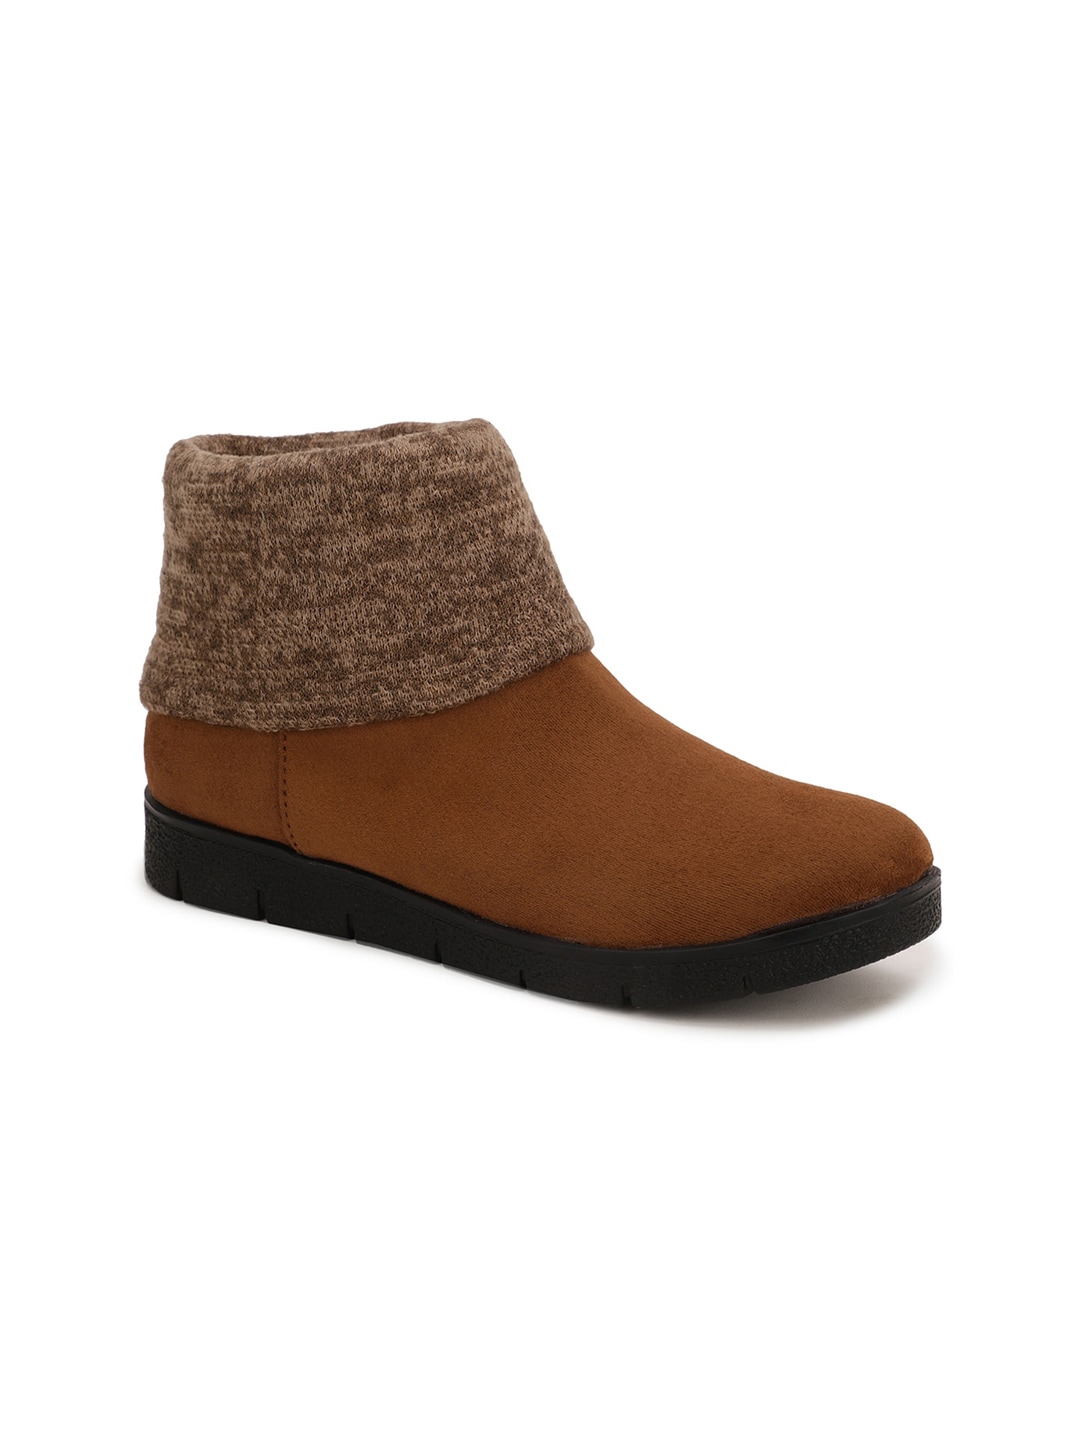 Bruno Manetti Women Tan Suede Flat Boots Price in India